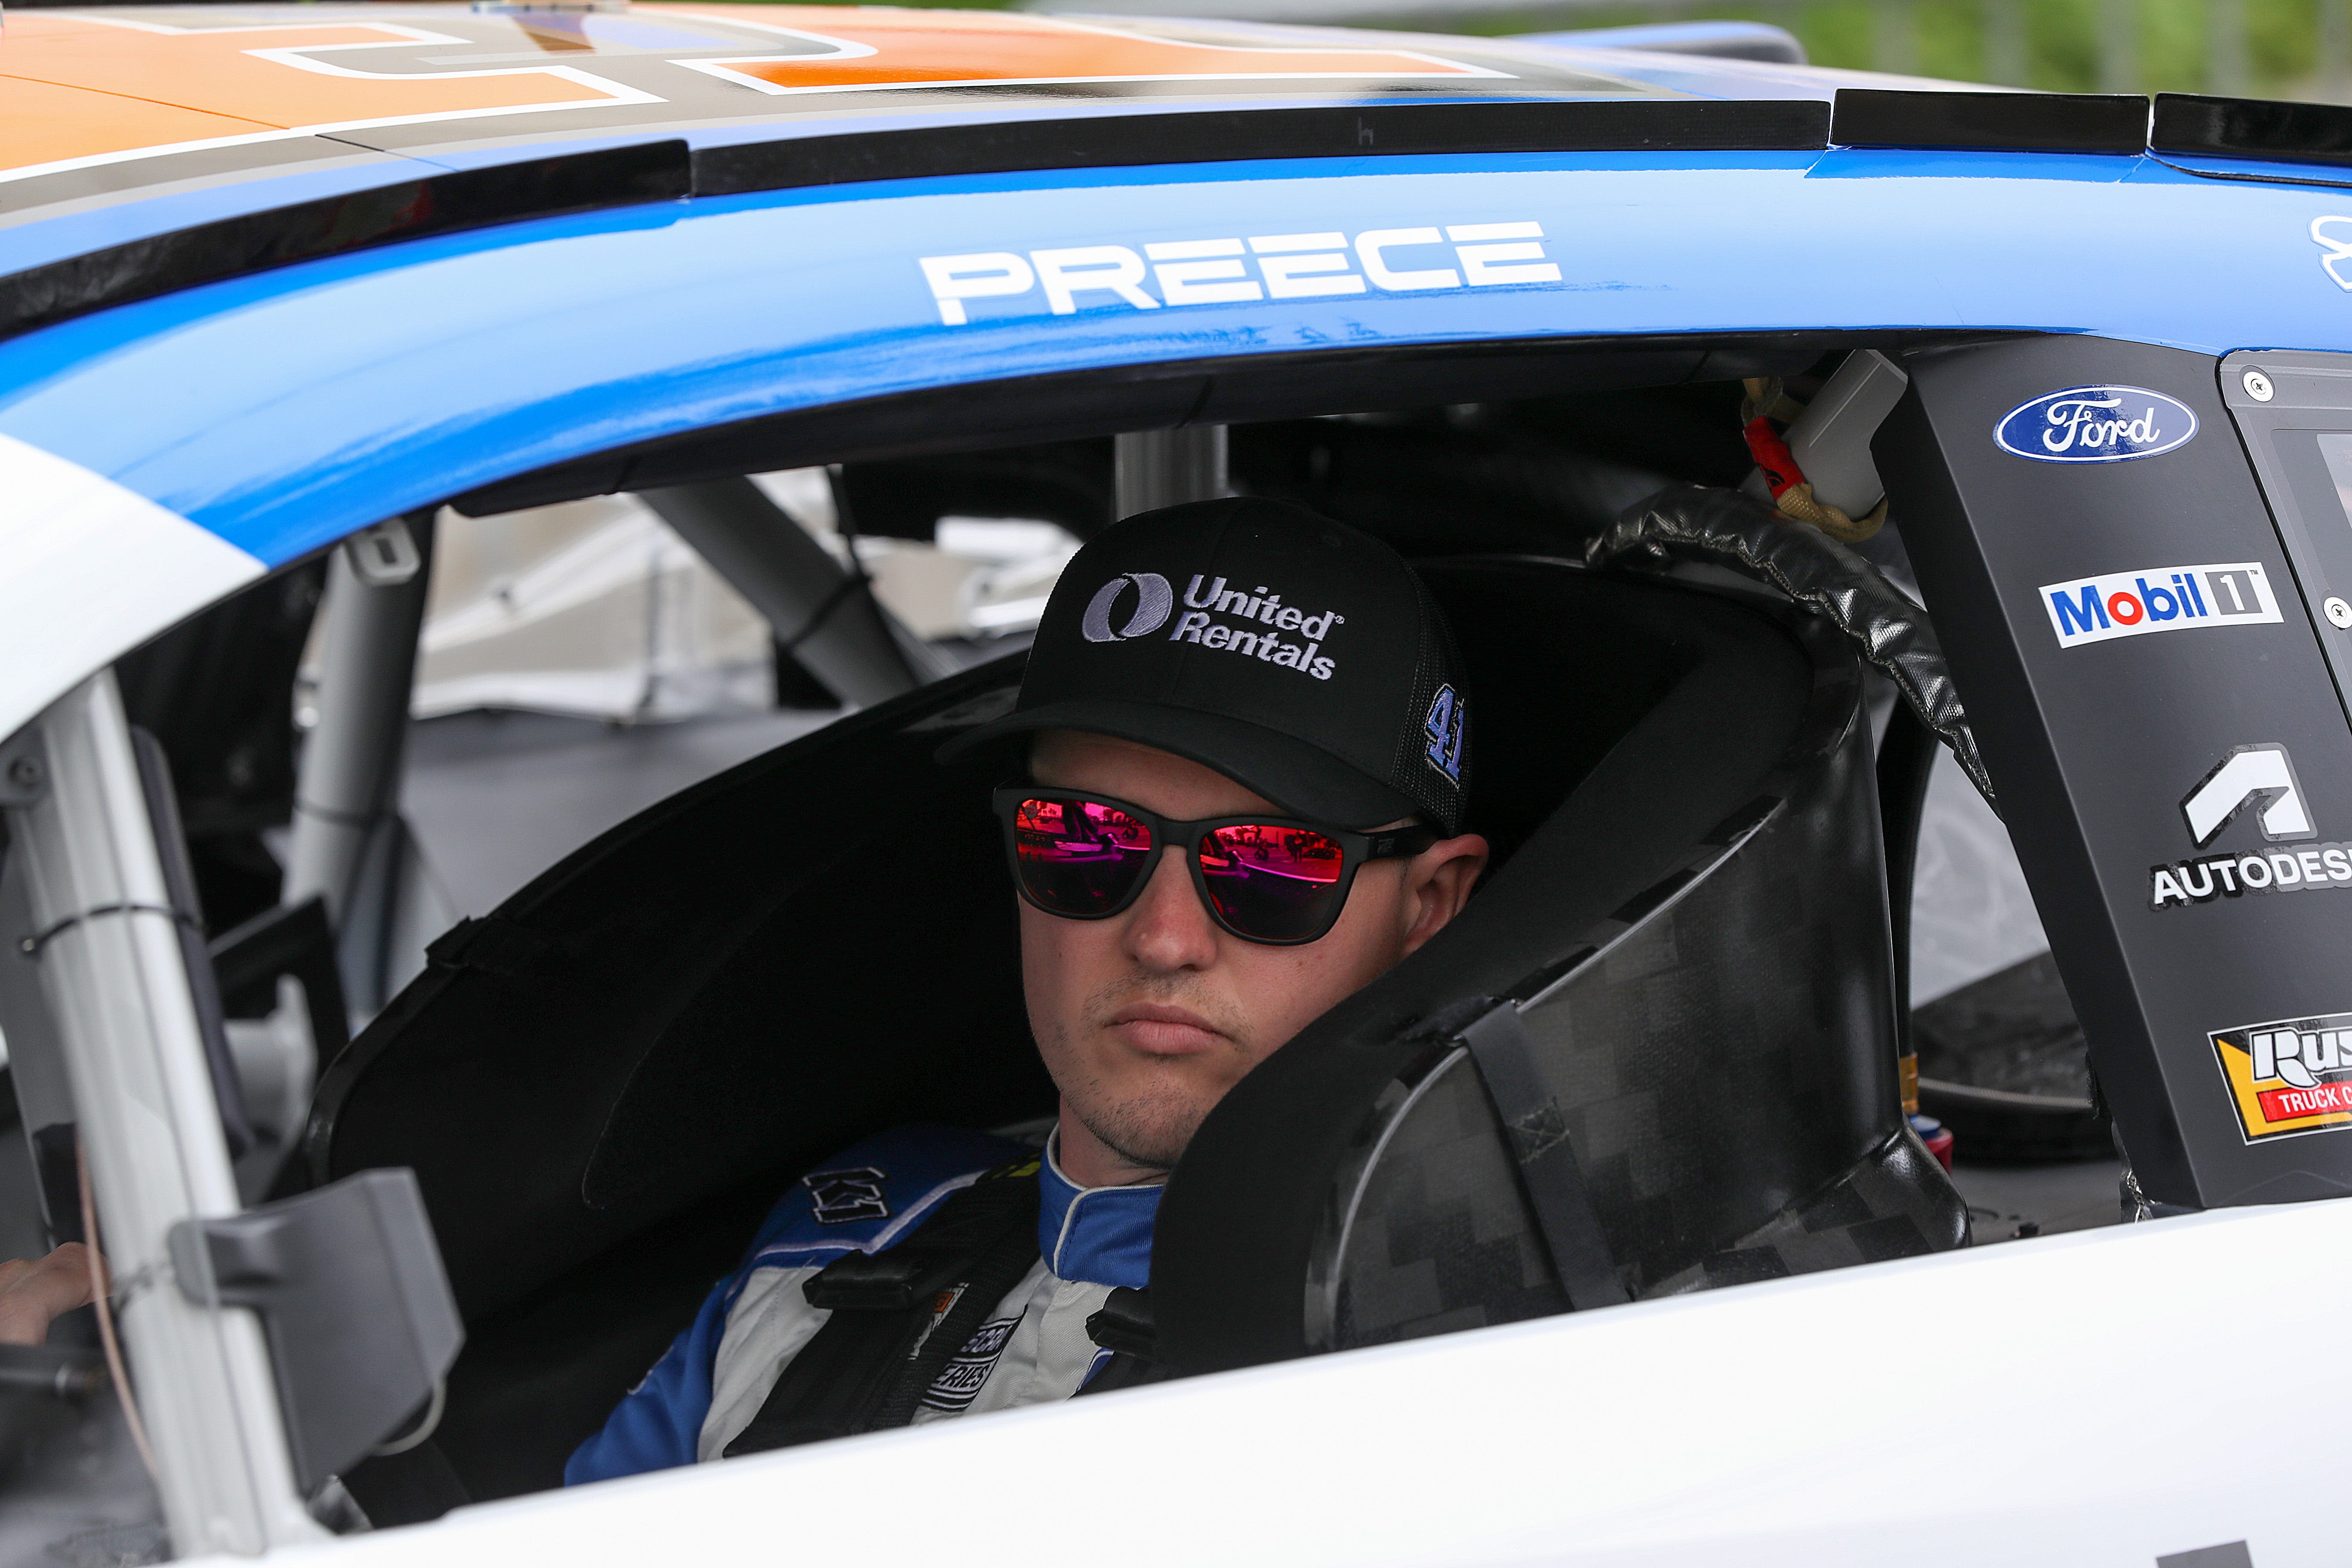 After a long wait this NASCAR driver gets his first chance to race the Slinger Nationals: Ryan Preece Q&A